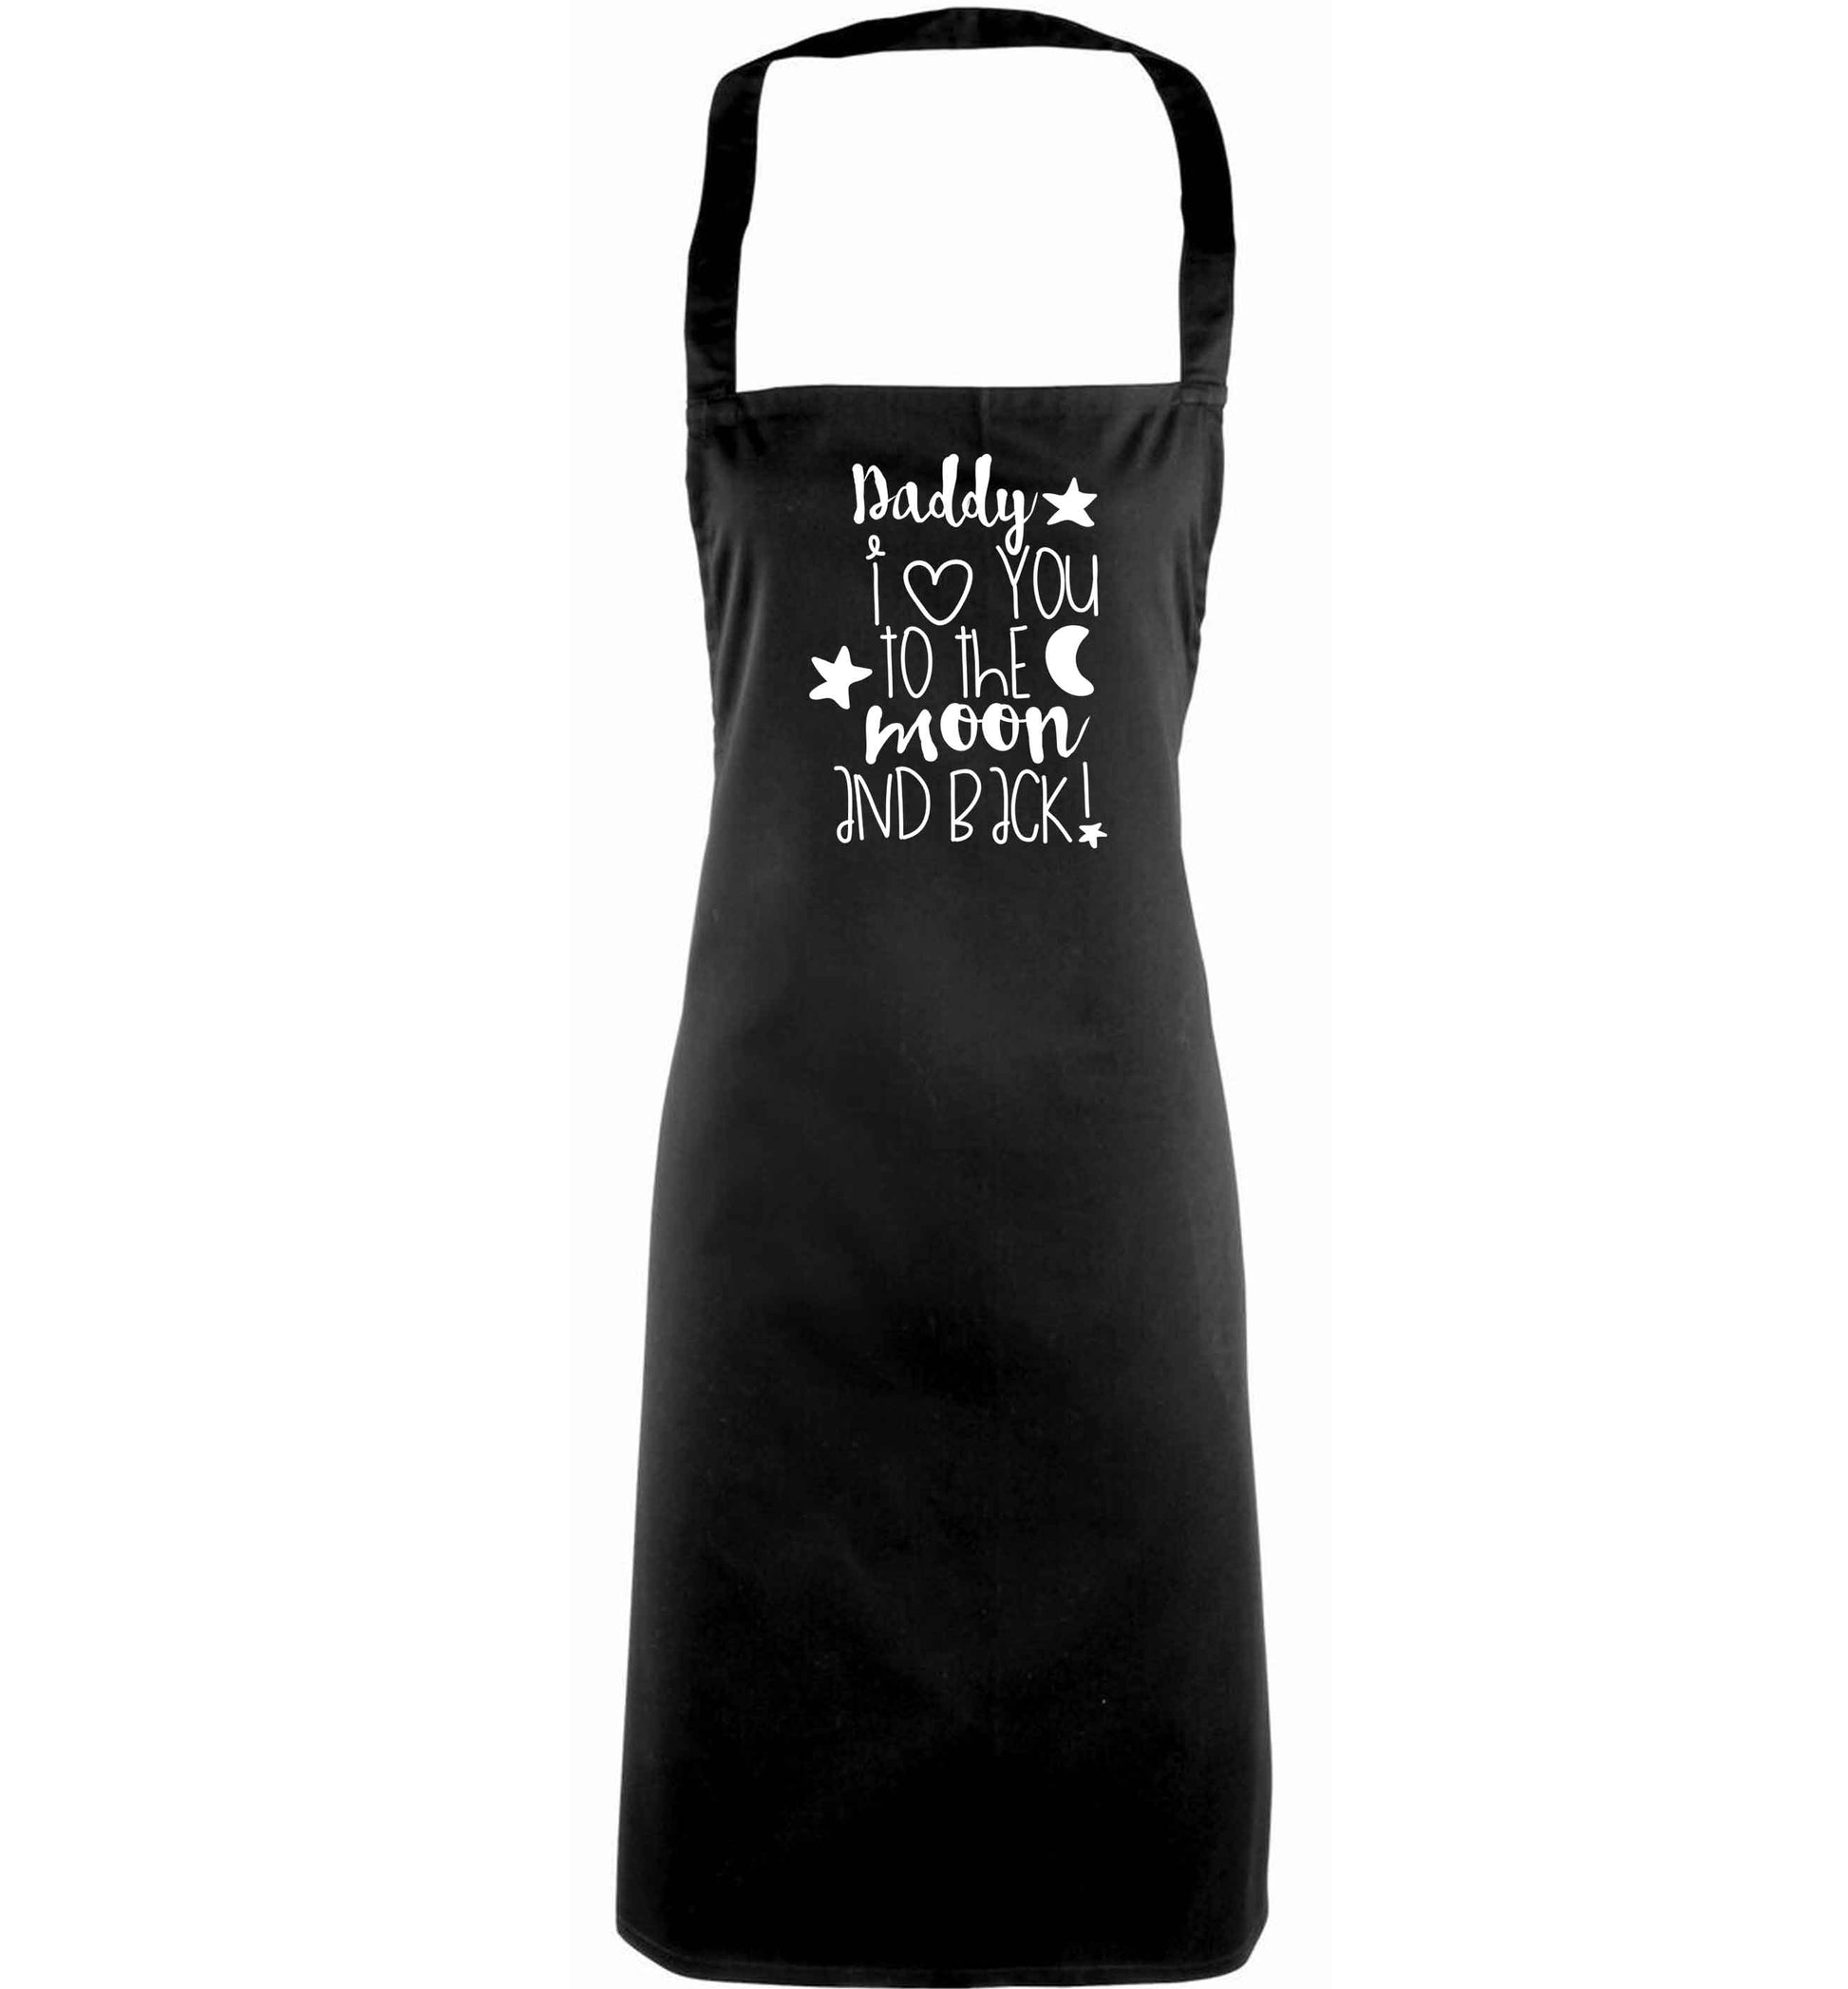 Daddy I love you to the moon and back adults black apron